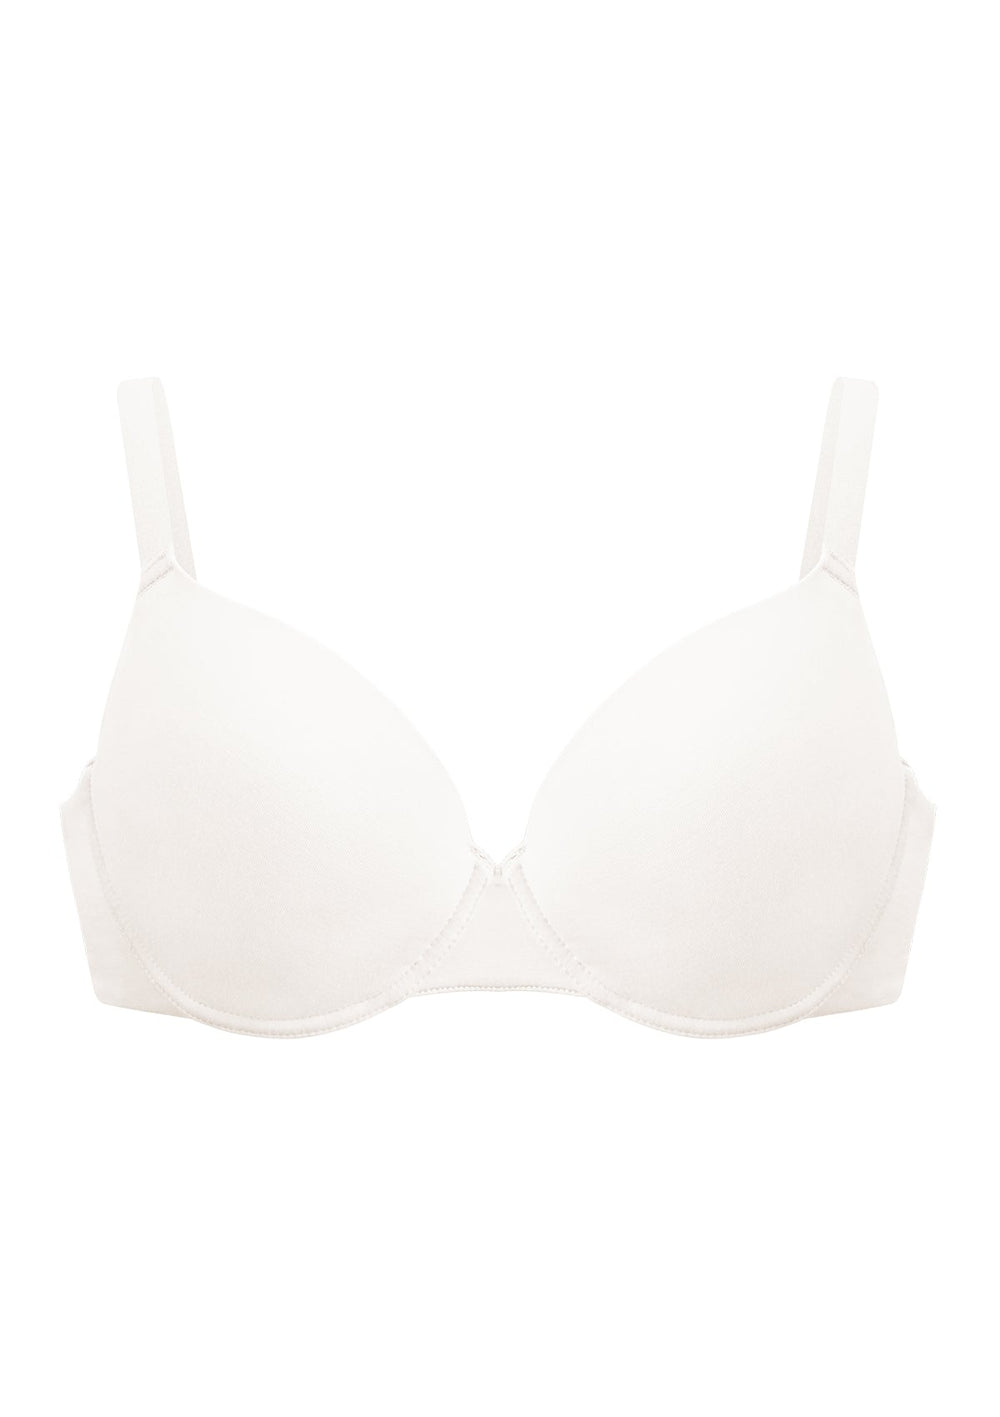 Buy Women's Under-Wired Padded Polyester Elastane Stretch Full Coverage T-Shirt  Bra with Breathable Spacer Cup and Adjustable Straps - White FE43